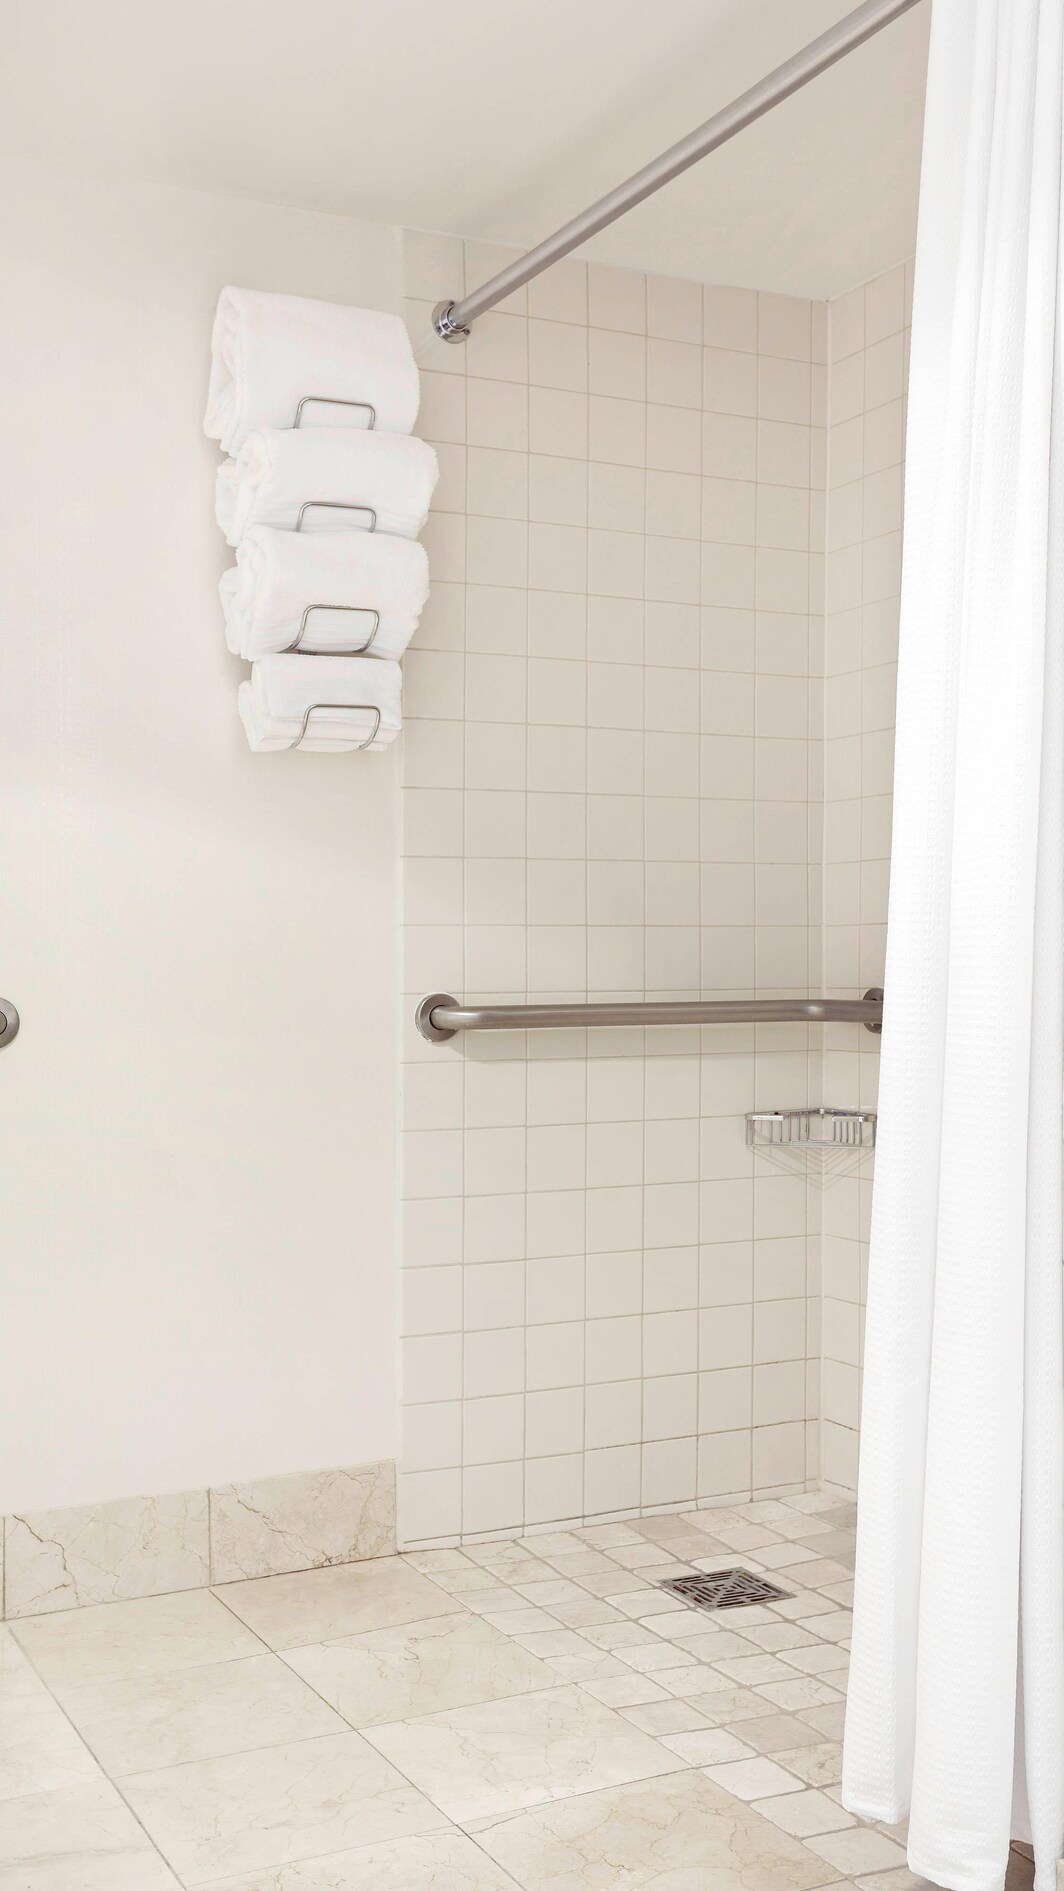 Accessible Bathroom with Roll-in Shower